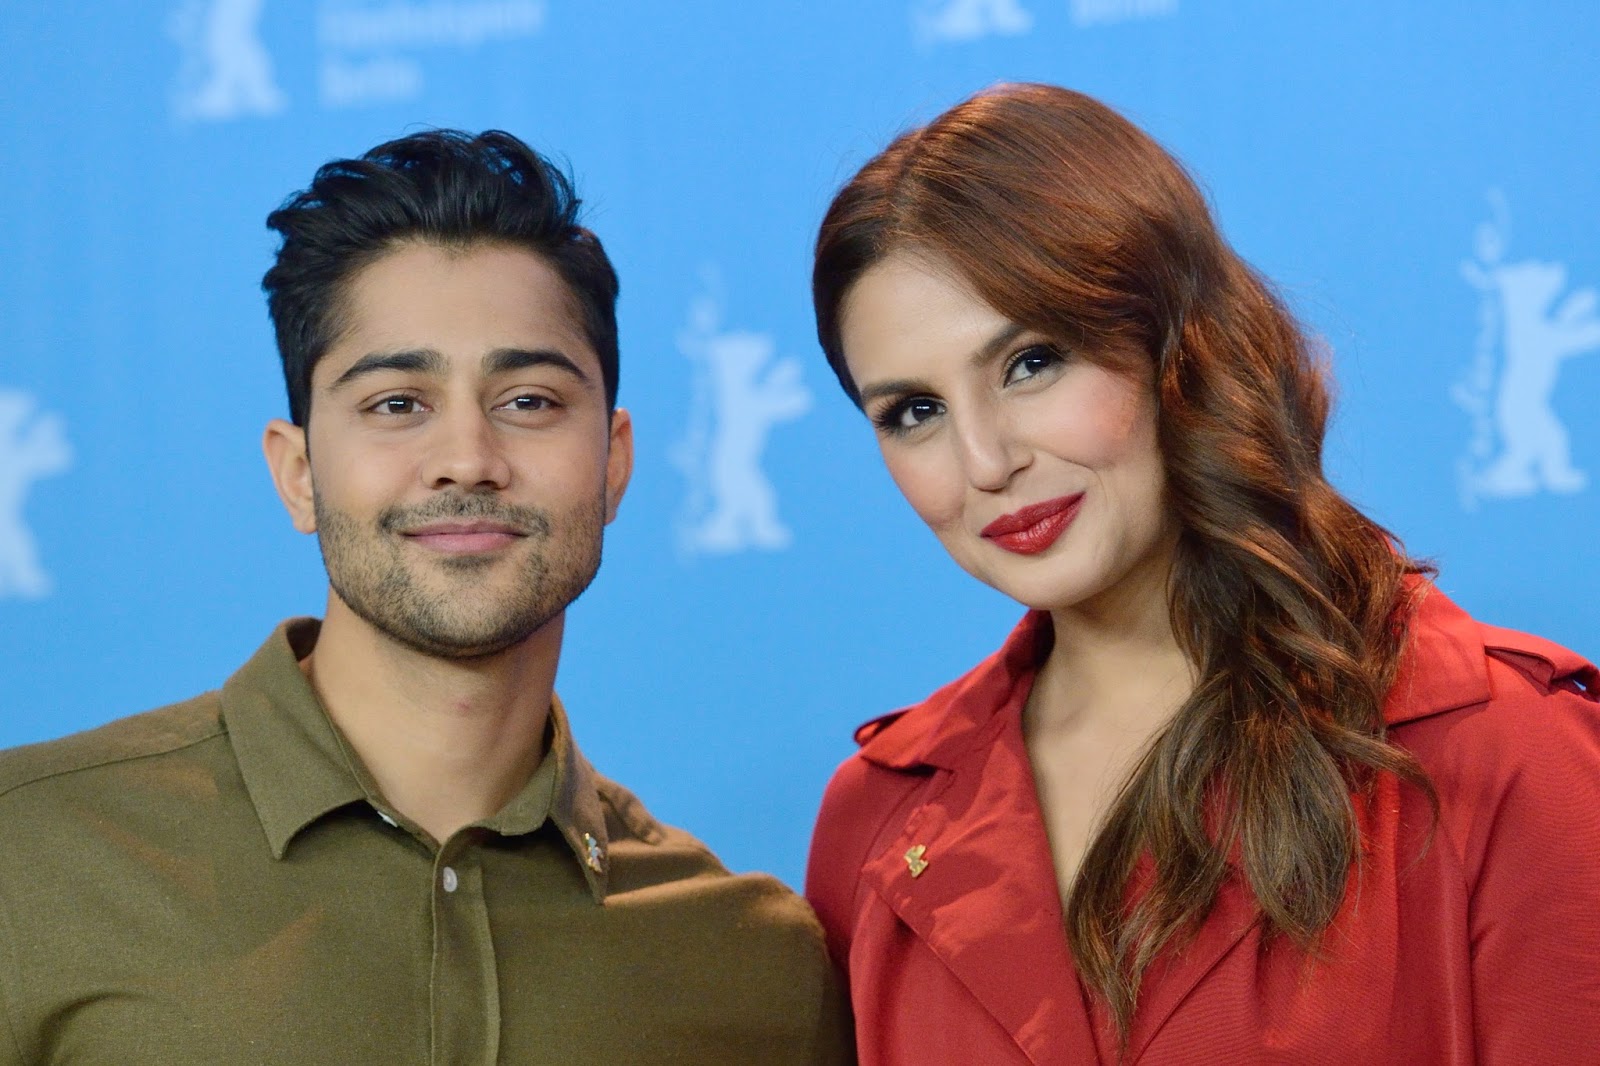 Huma Qureshi Looks Stunning As She Attends The 'Viceroy's House' Photocall During The 67th Berlinale International Film Festival in Berlin, Germany